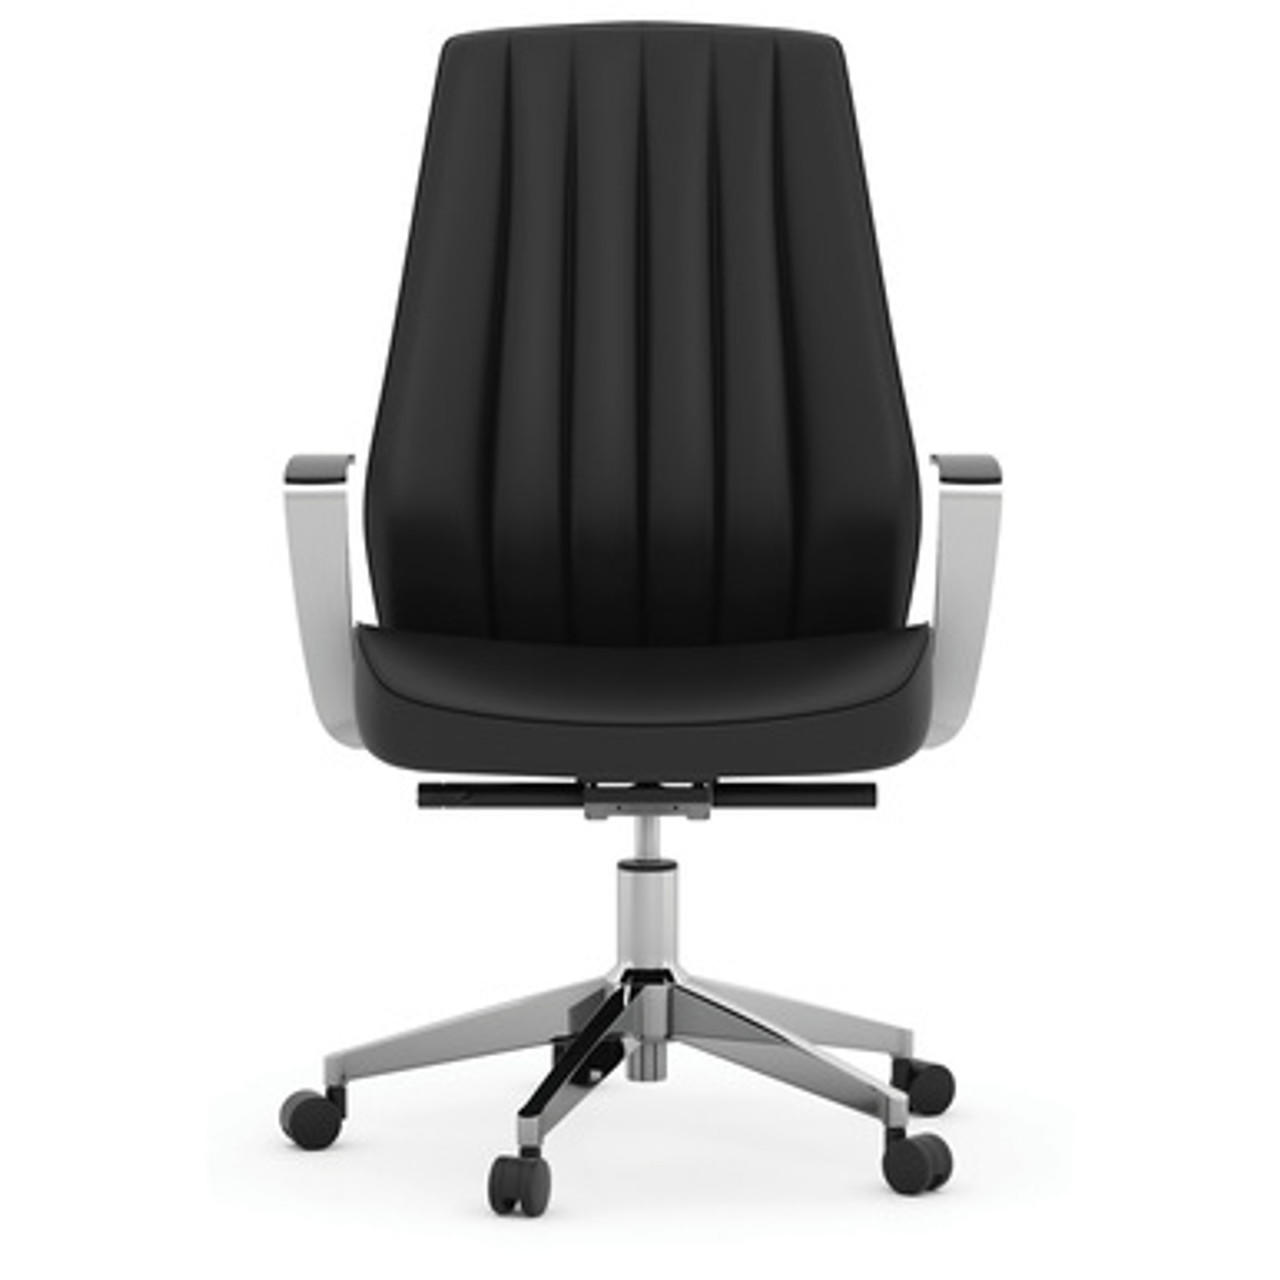  Office Source Empire Collection Executive Conference Chair 01CU2AMACL 